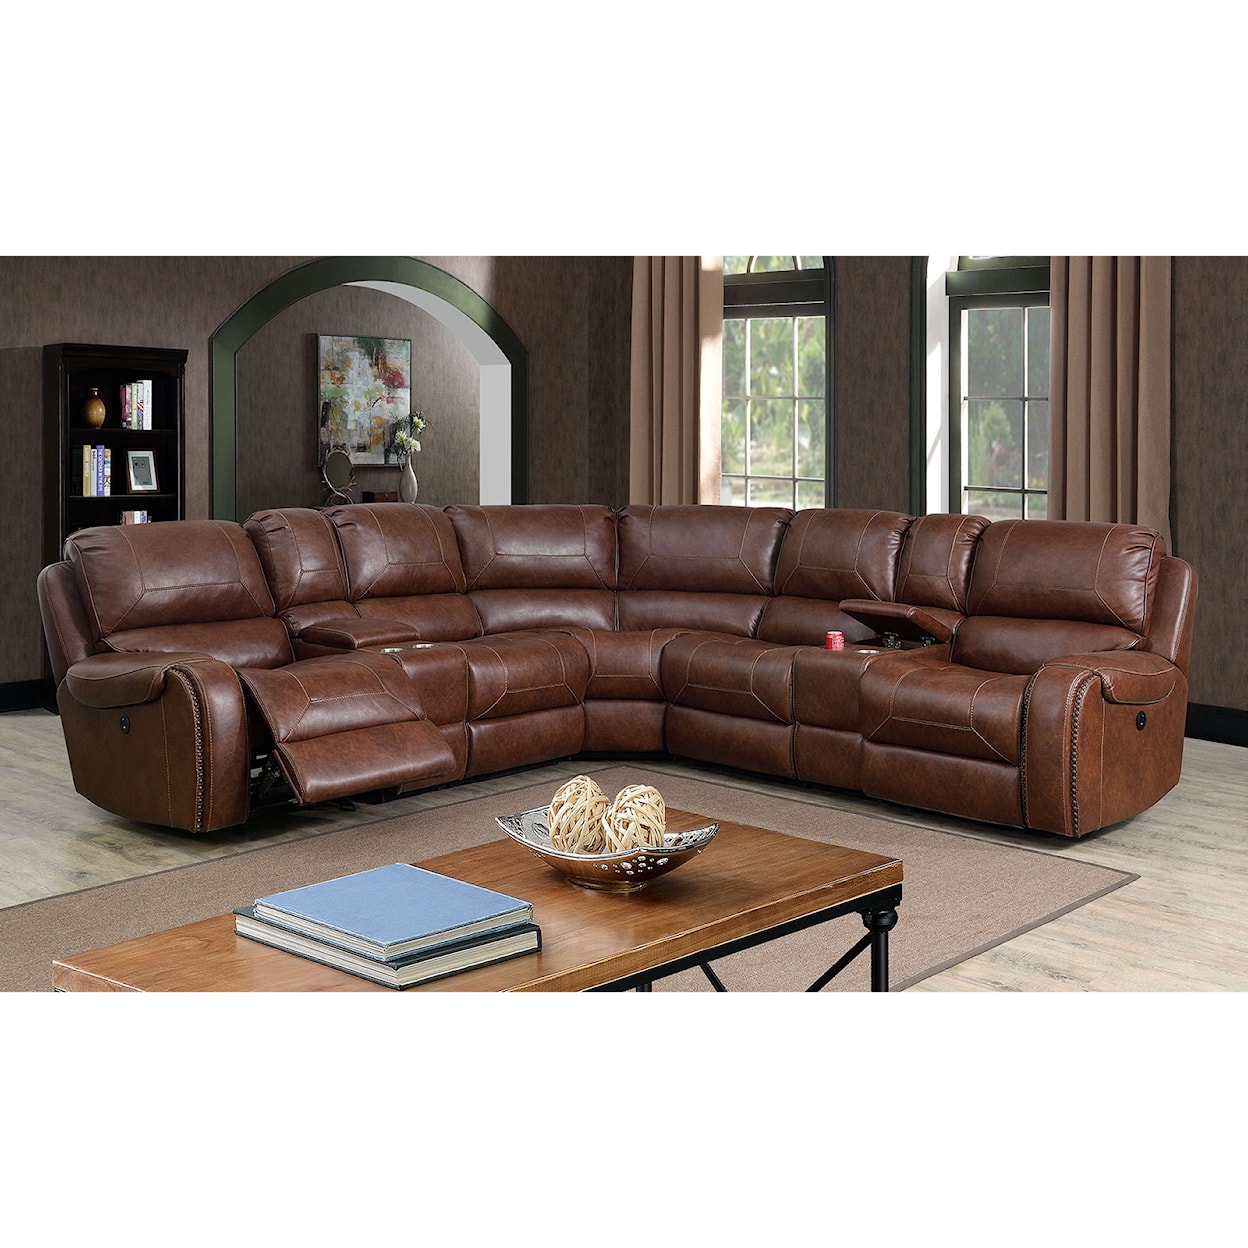 Furniture of America Joanne Power Sectional